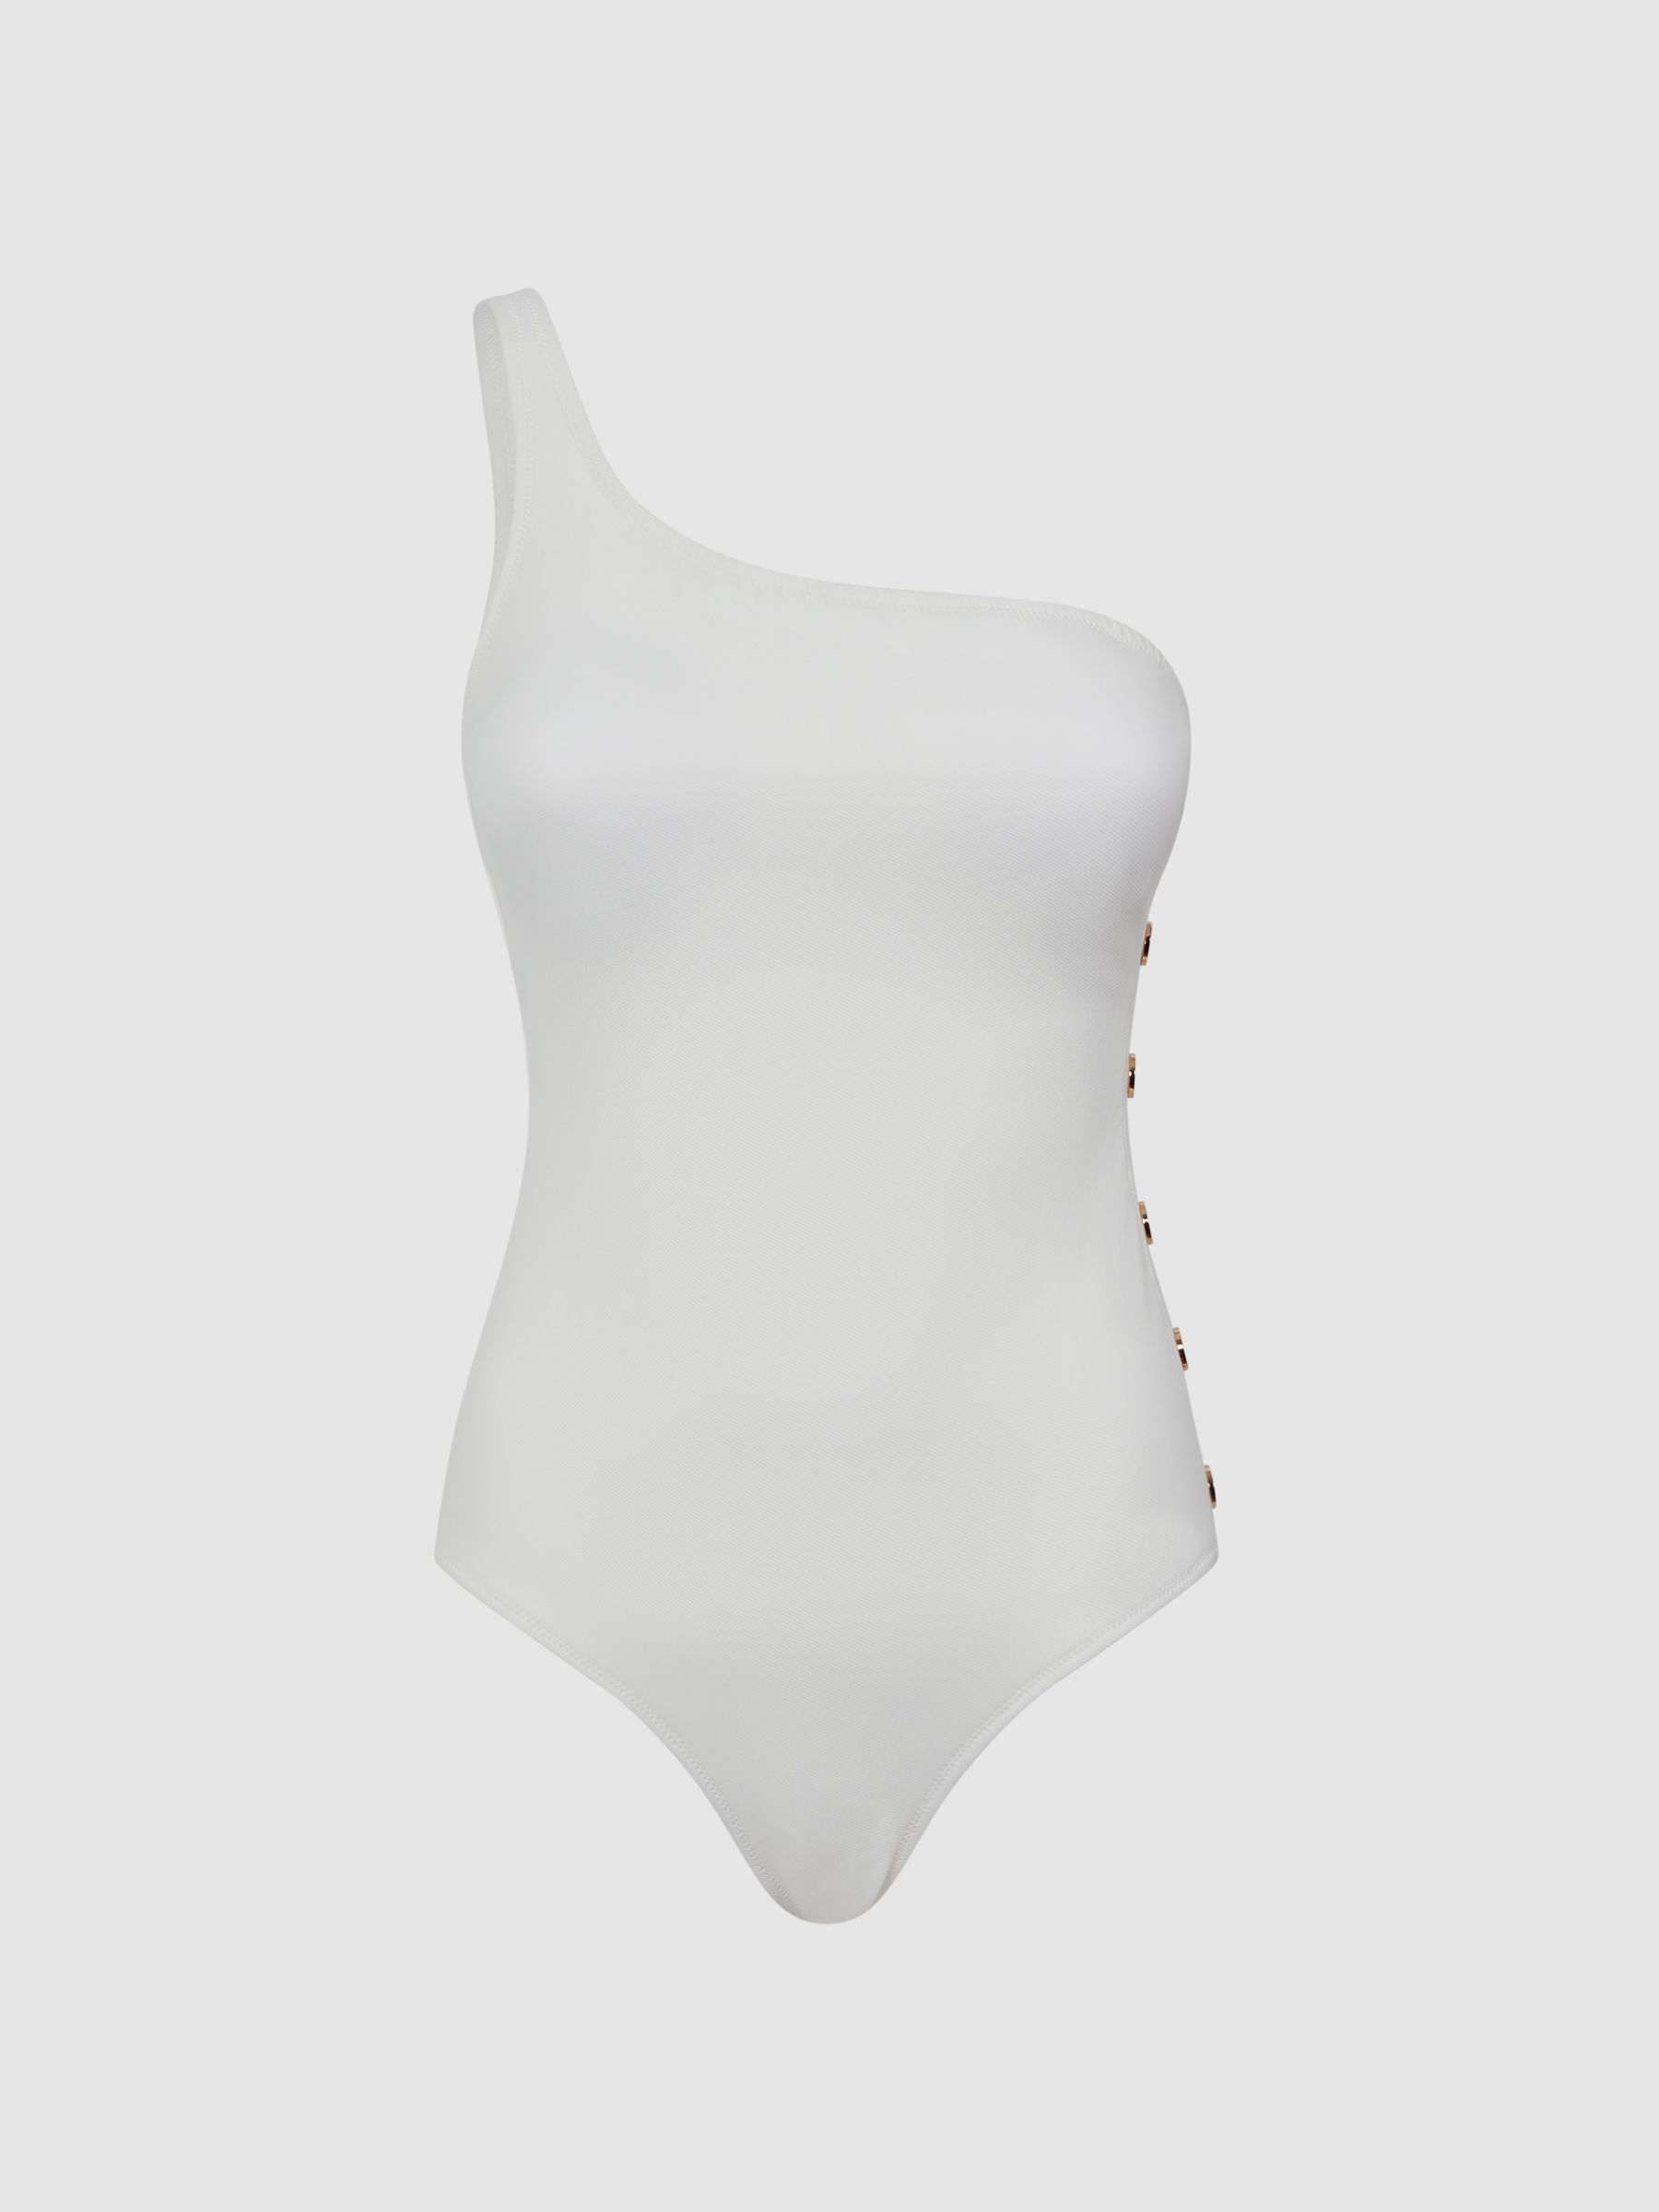 Reiss Bethany Asymmetric Swimsuit With Button Detail - REISS